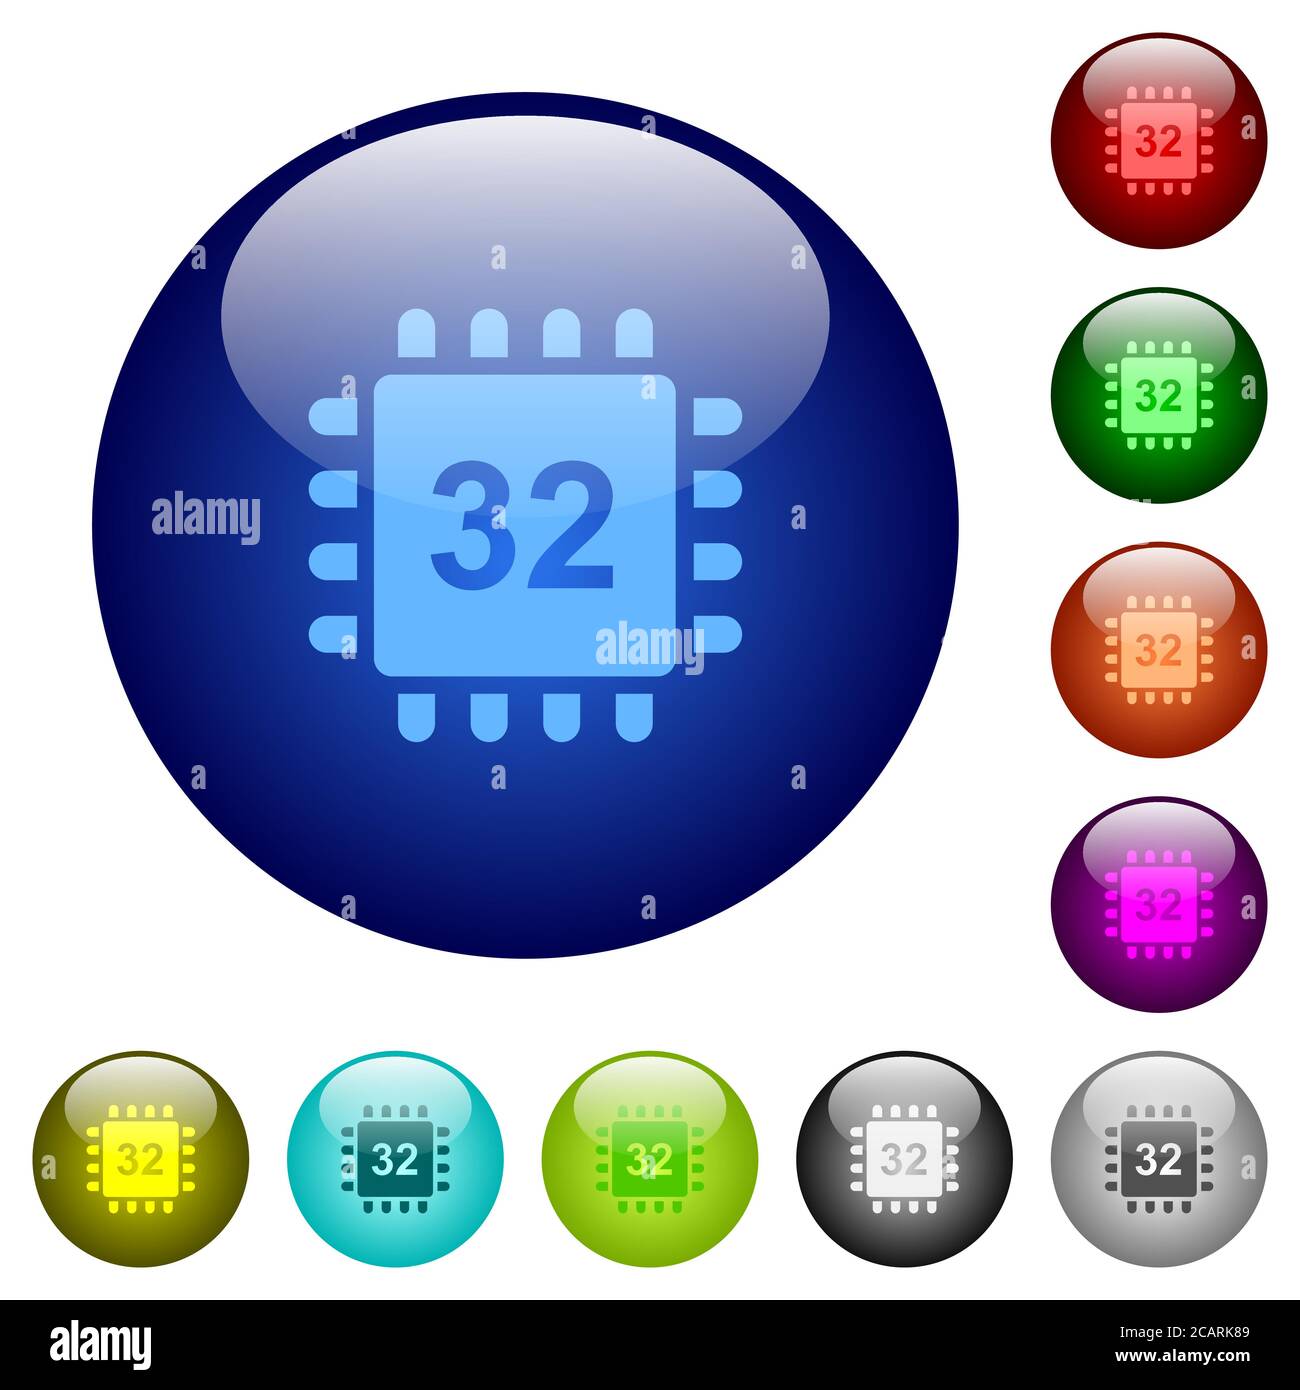 Microprocessor 32 bit architecture icons on round color glass buttons Stock Vector